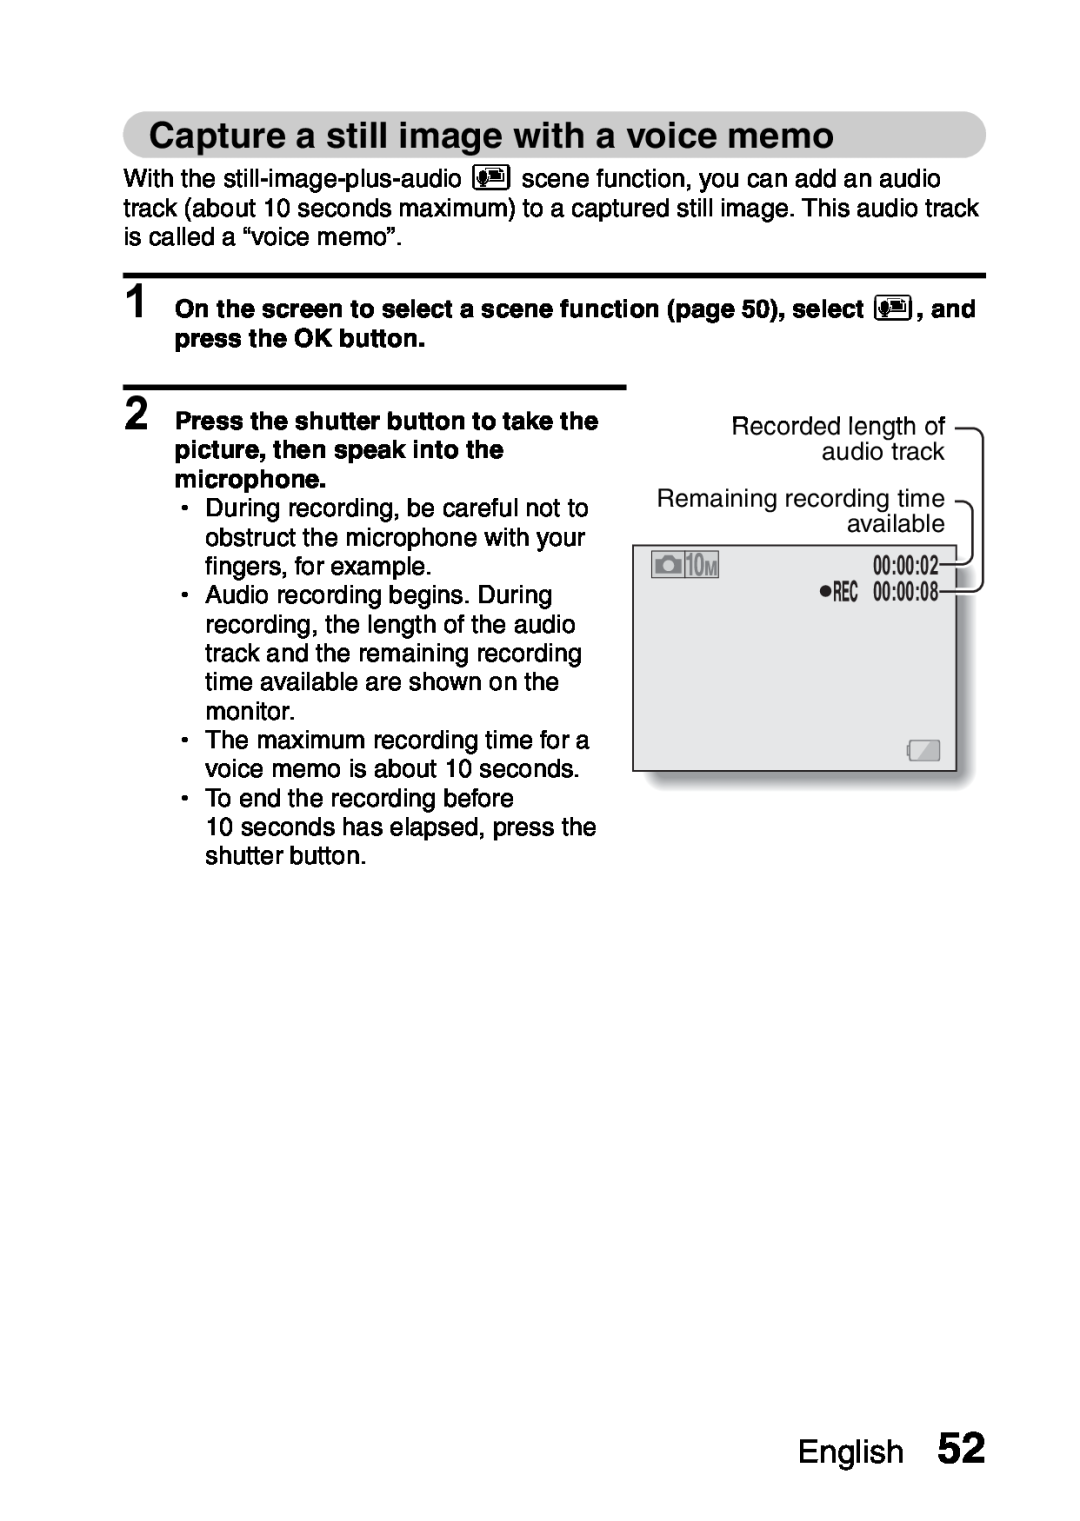 Samsung R50 instruction manual Capture a still image with a voice memo, English 